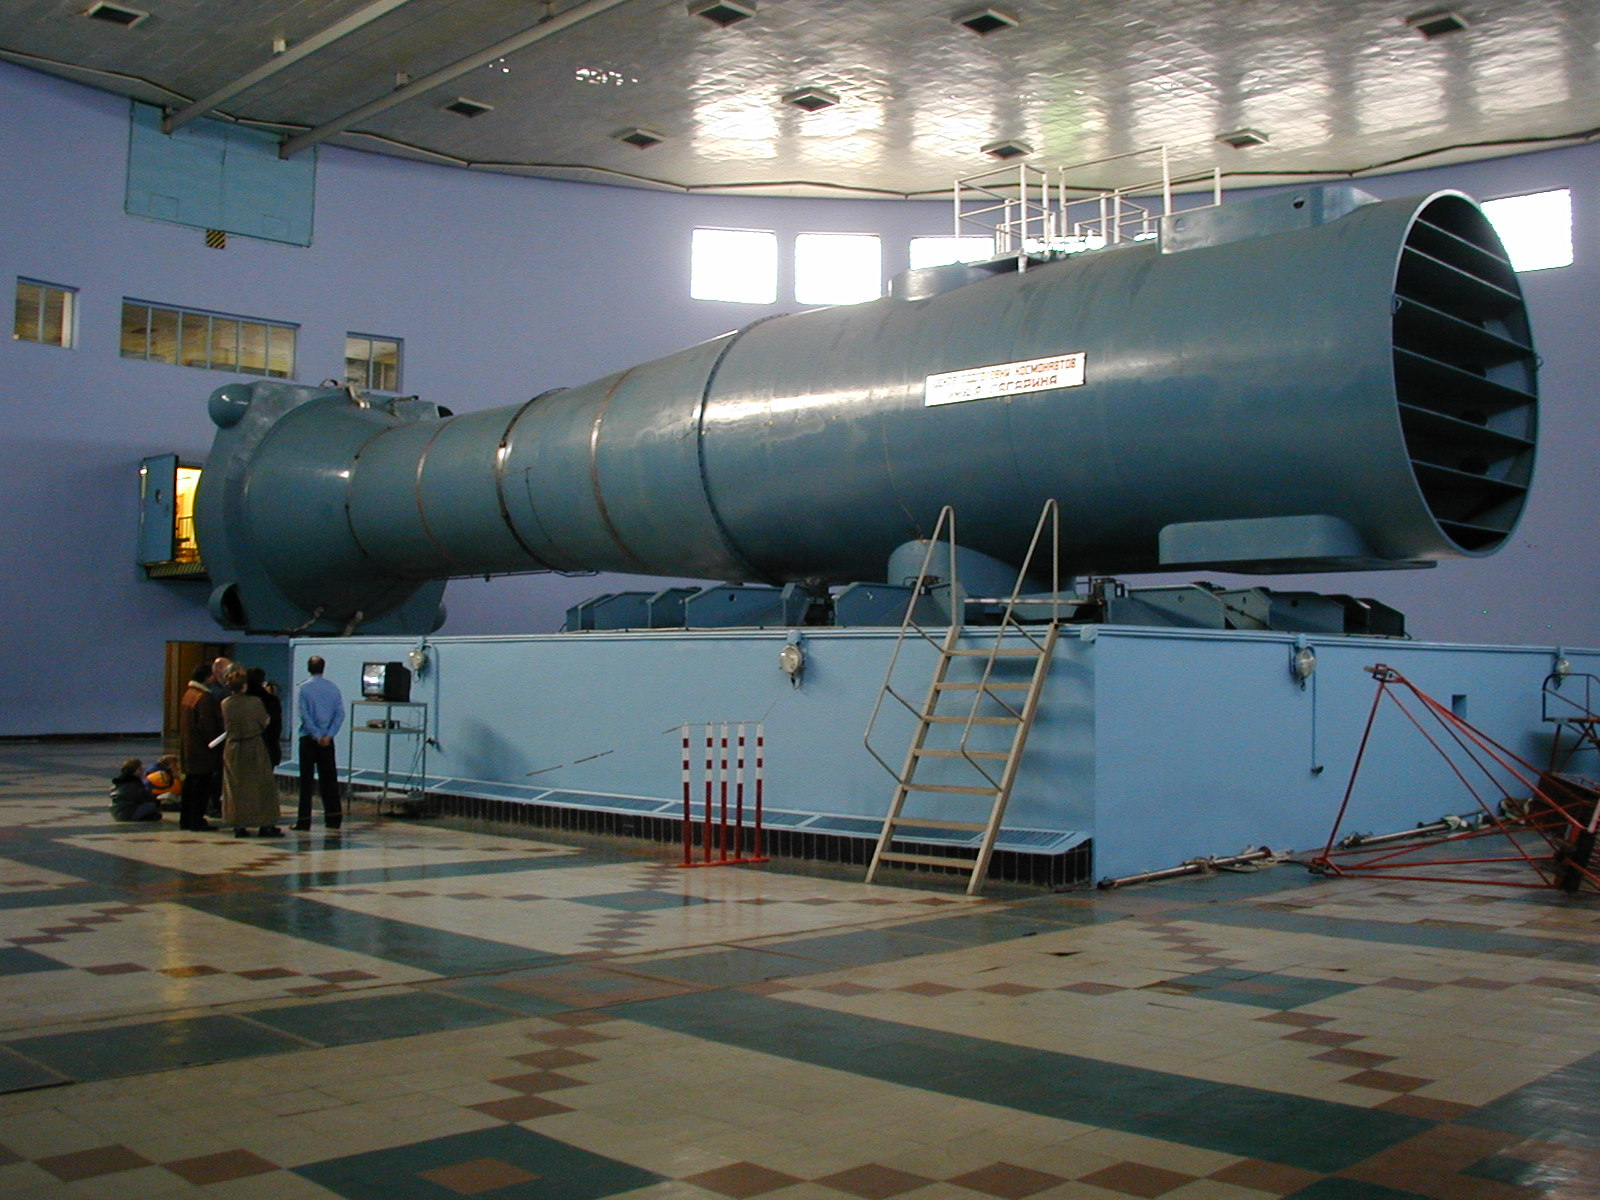 The TsF-18 Centrifuge in Star City, Russia, on which I have done several training sessions.  With a moment arm of 59 feet and capable of monstrous G loads, we sometimes affectionately refer to this as the MOAC; 'mother of all centrifuges'